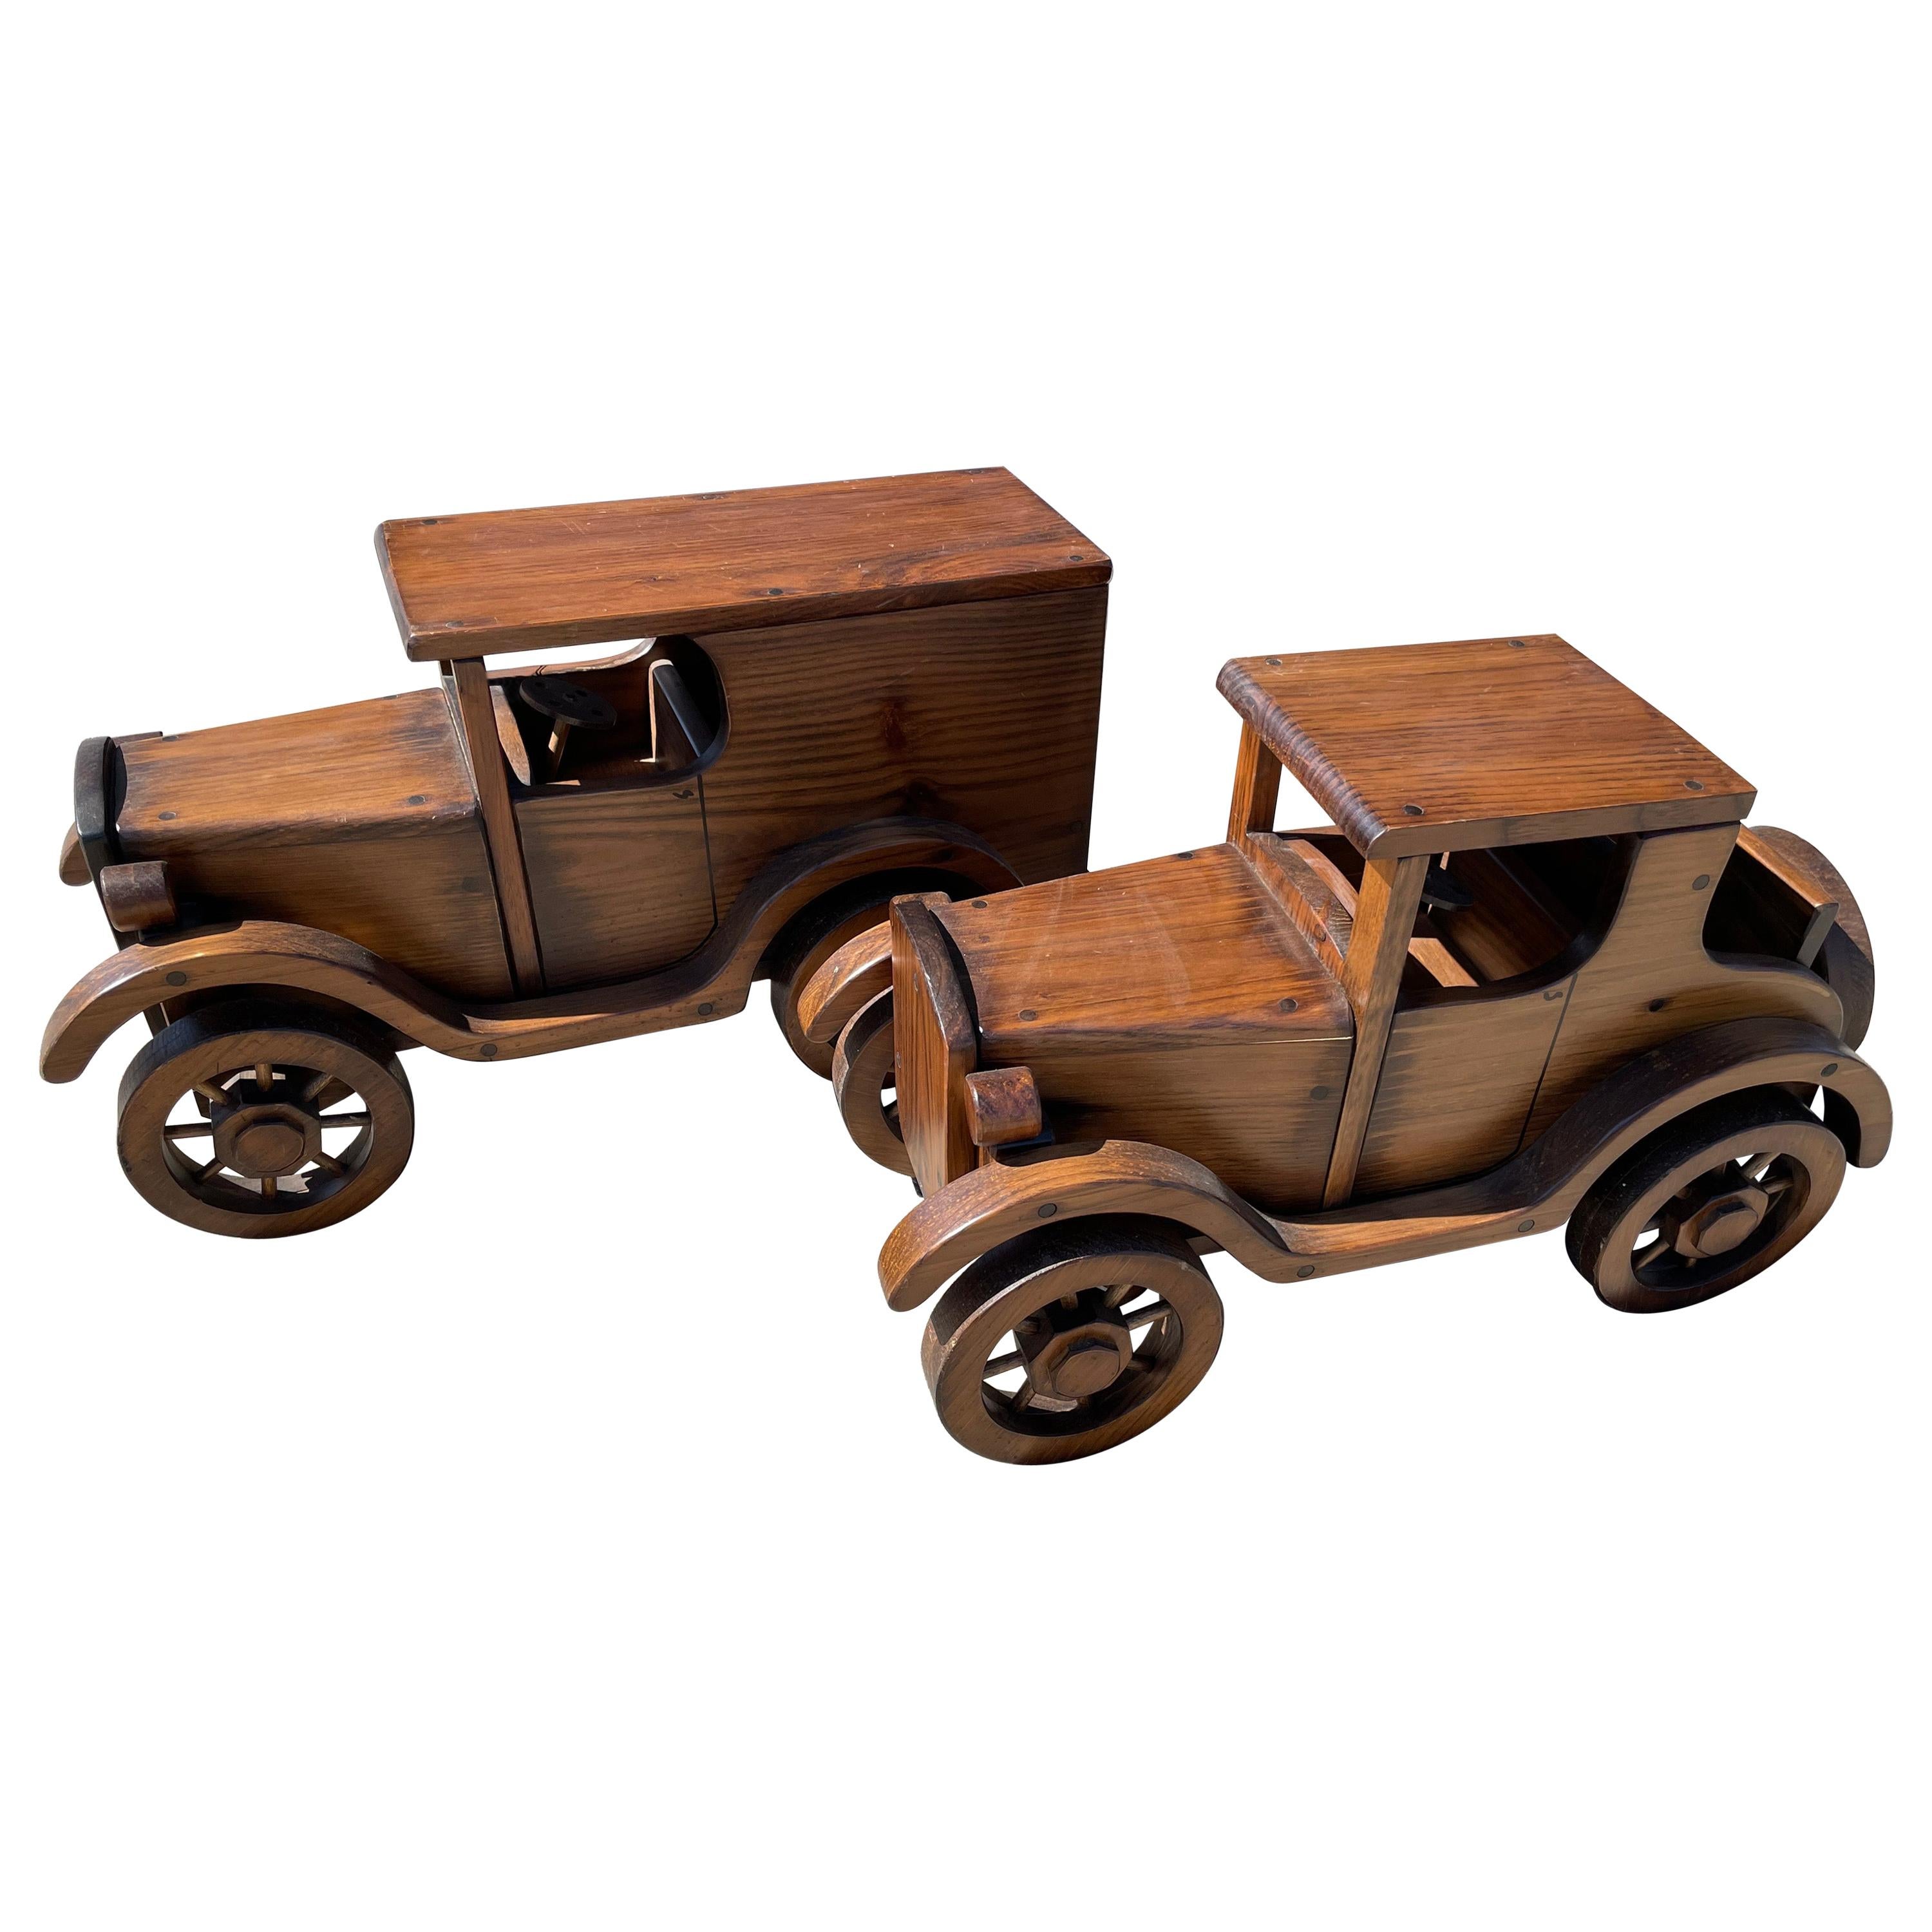 Pair of Beautifully Crafted Handmade Wooden Large Automobiles